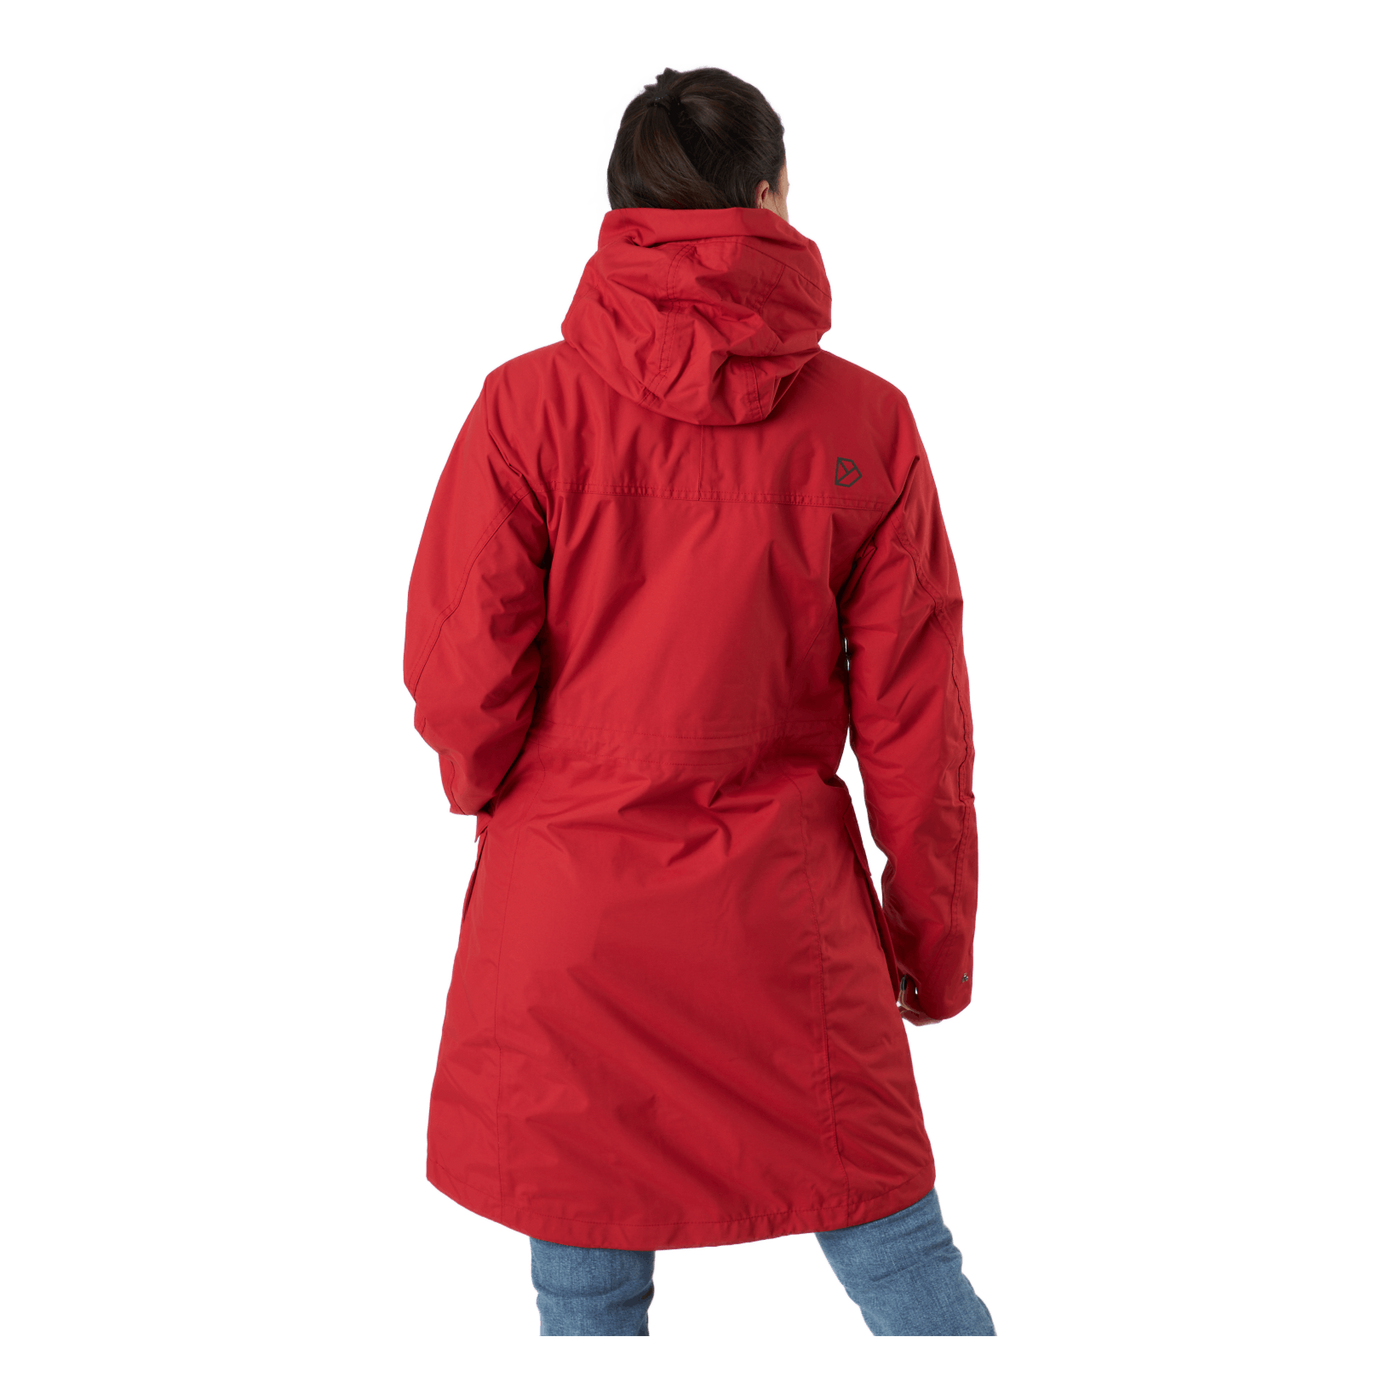 Thelma Wns Parka 6 Pomme Red - Didriksons – Runforest.com